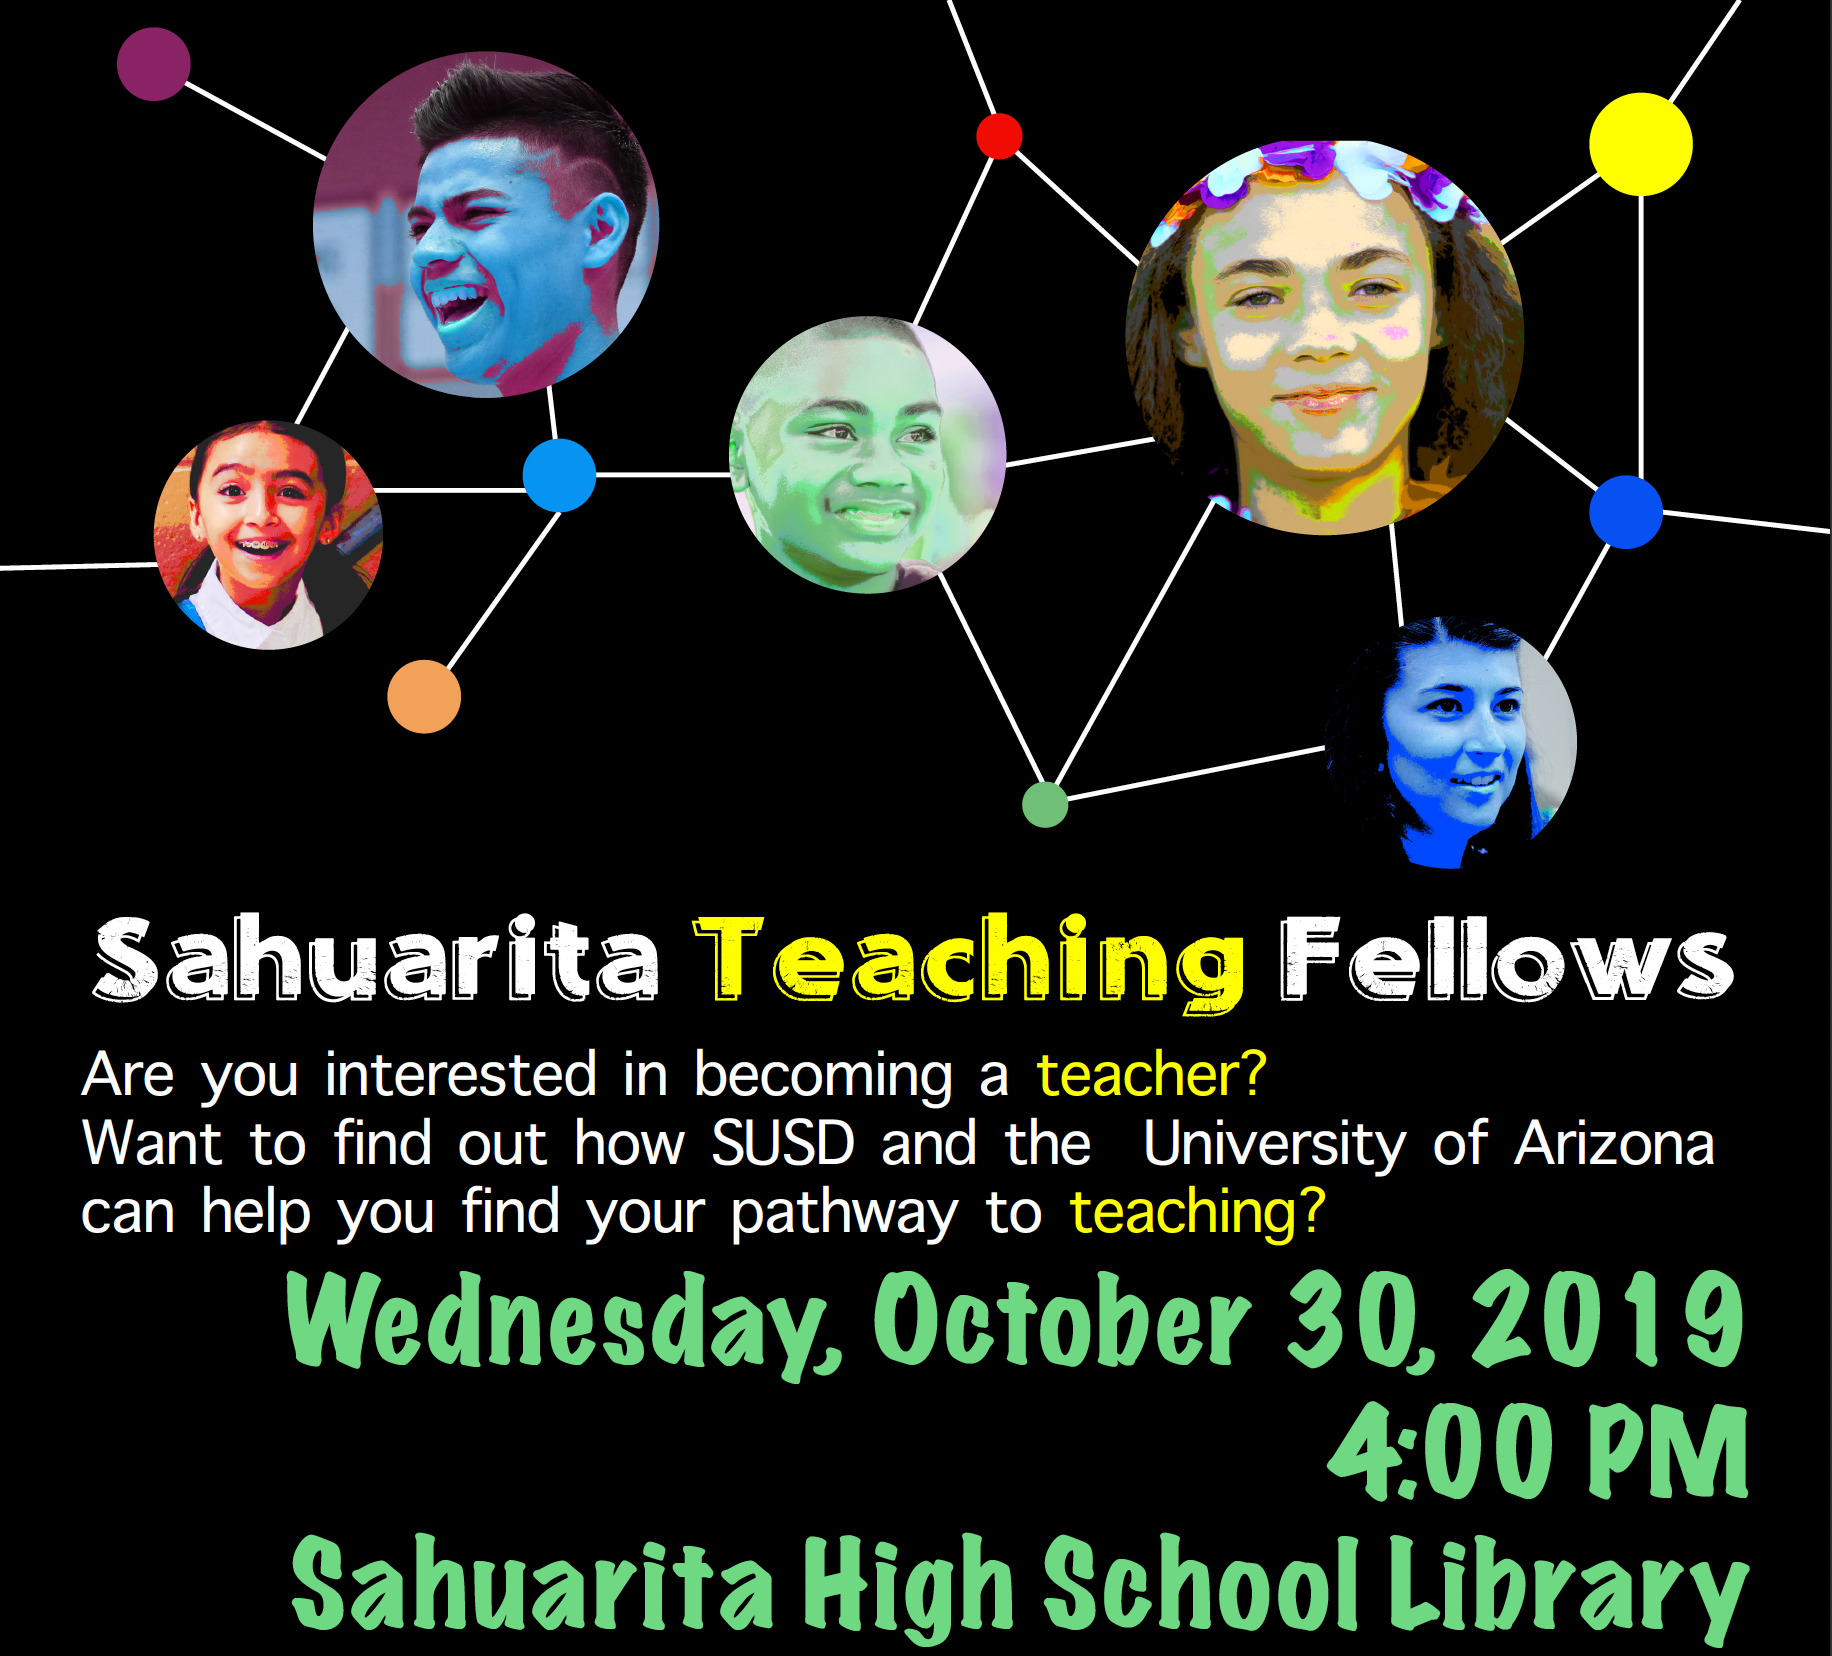 Sahuarita Teaching Fellows Are you interested in becoming a teacher? Want to find out how SUSD and the University of Arizona can help you find your pathway to teaching? Wednesday, October 30, 2019 4:00 PM Sahuarita High School Library